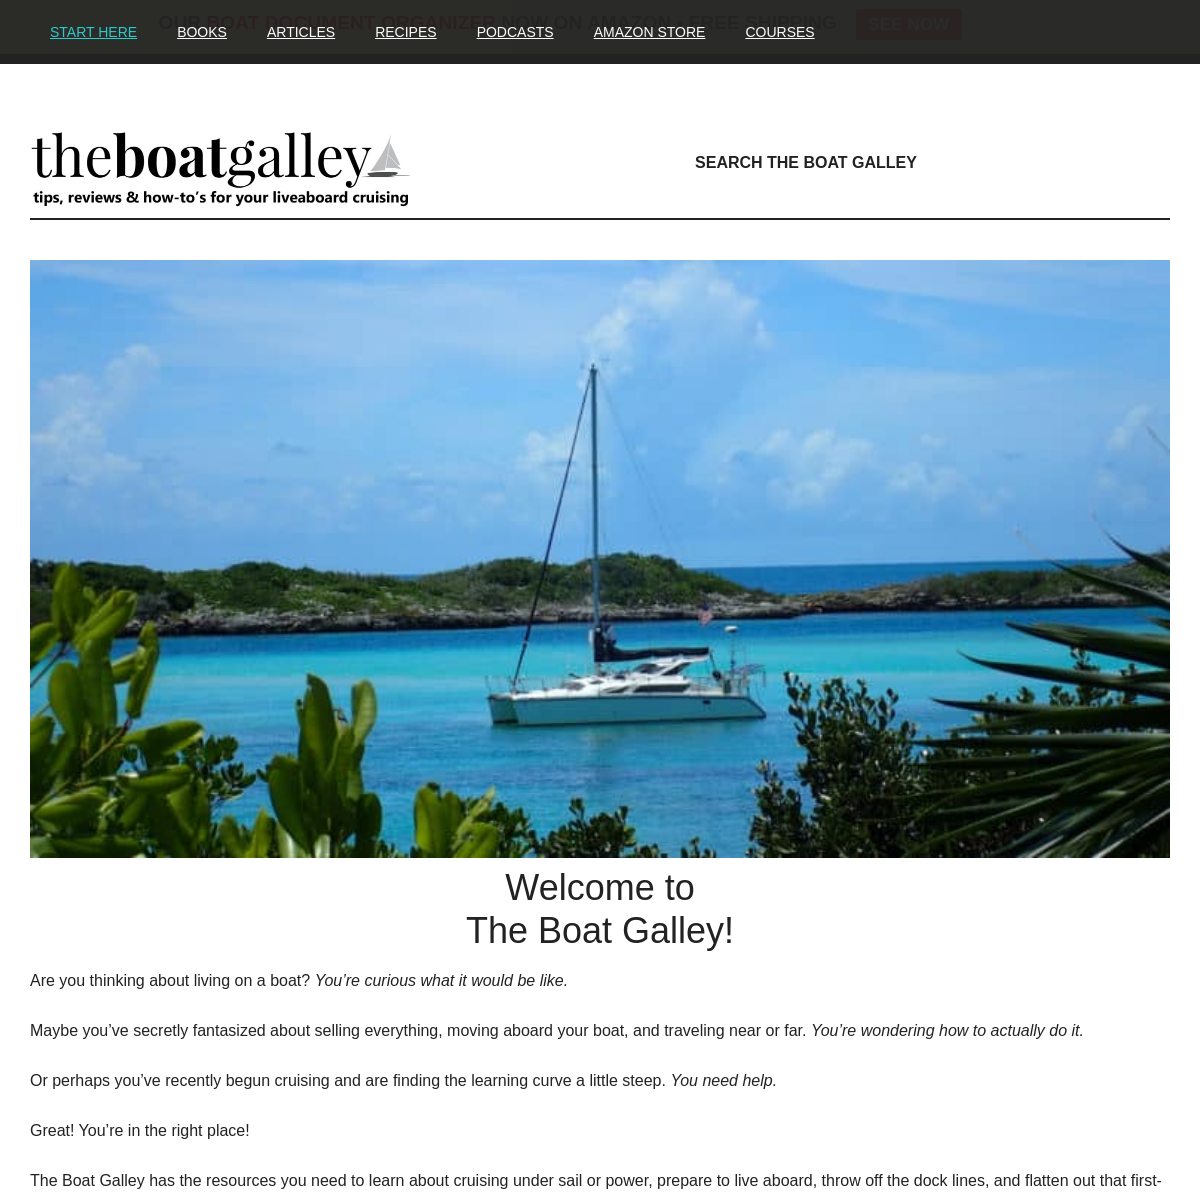 A complete backup of theboatgalley.com